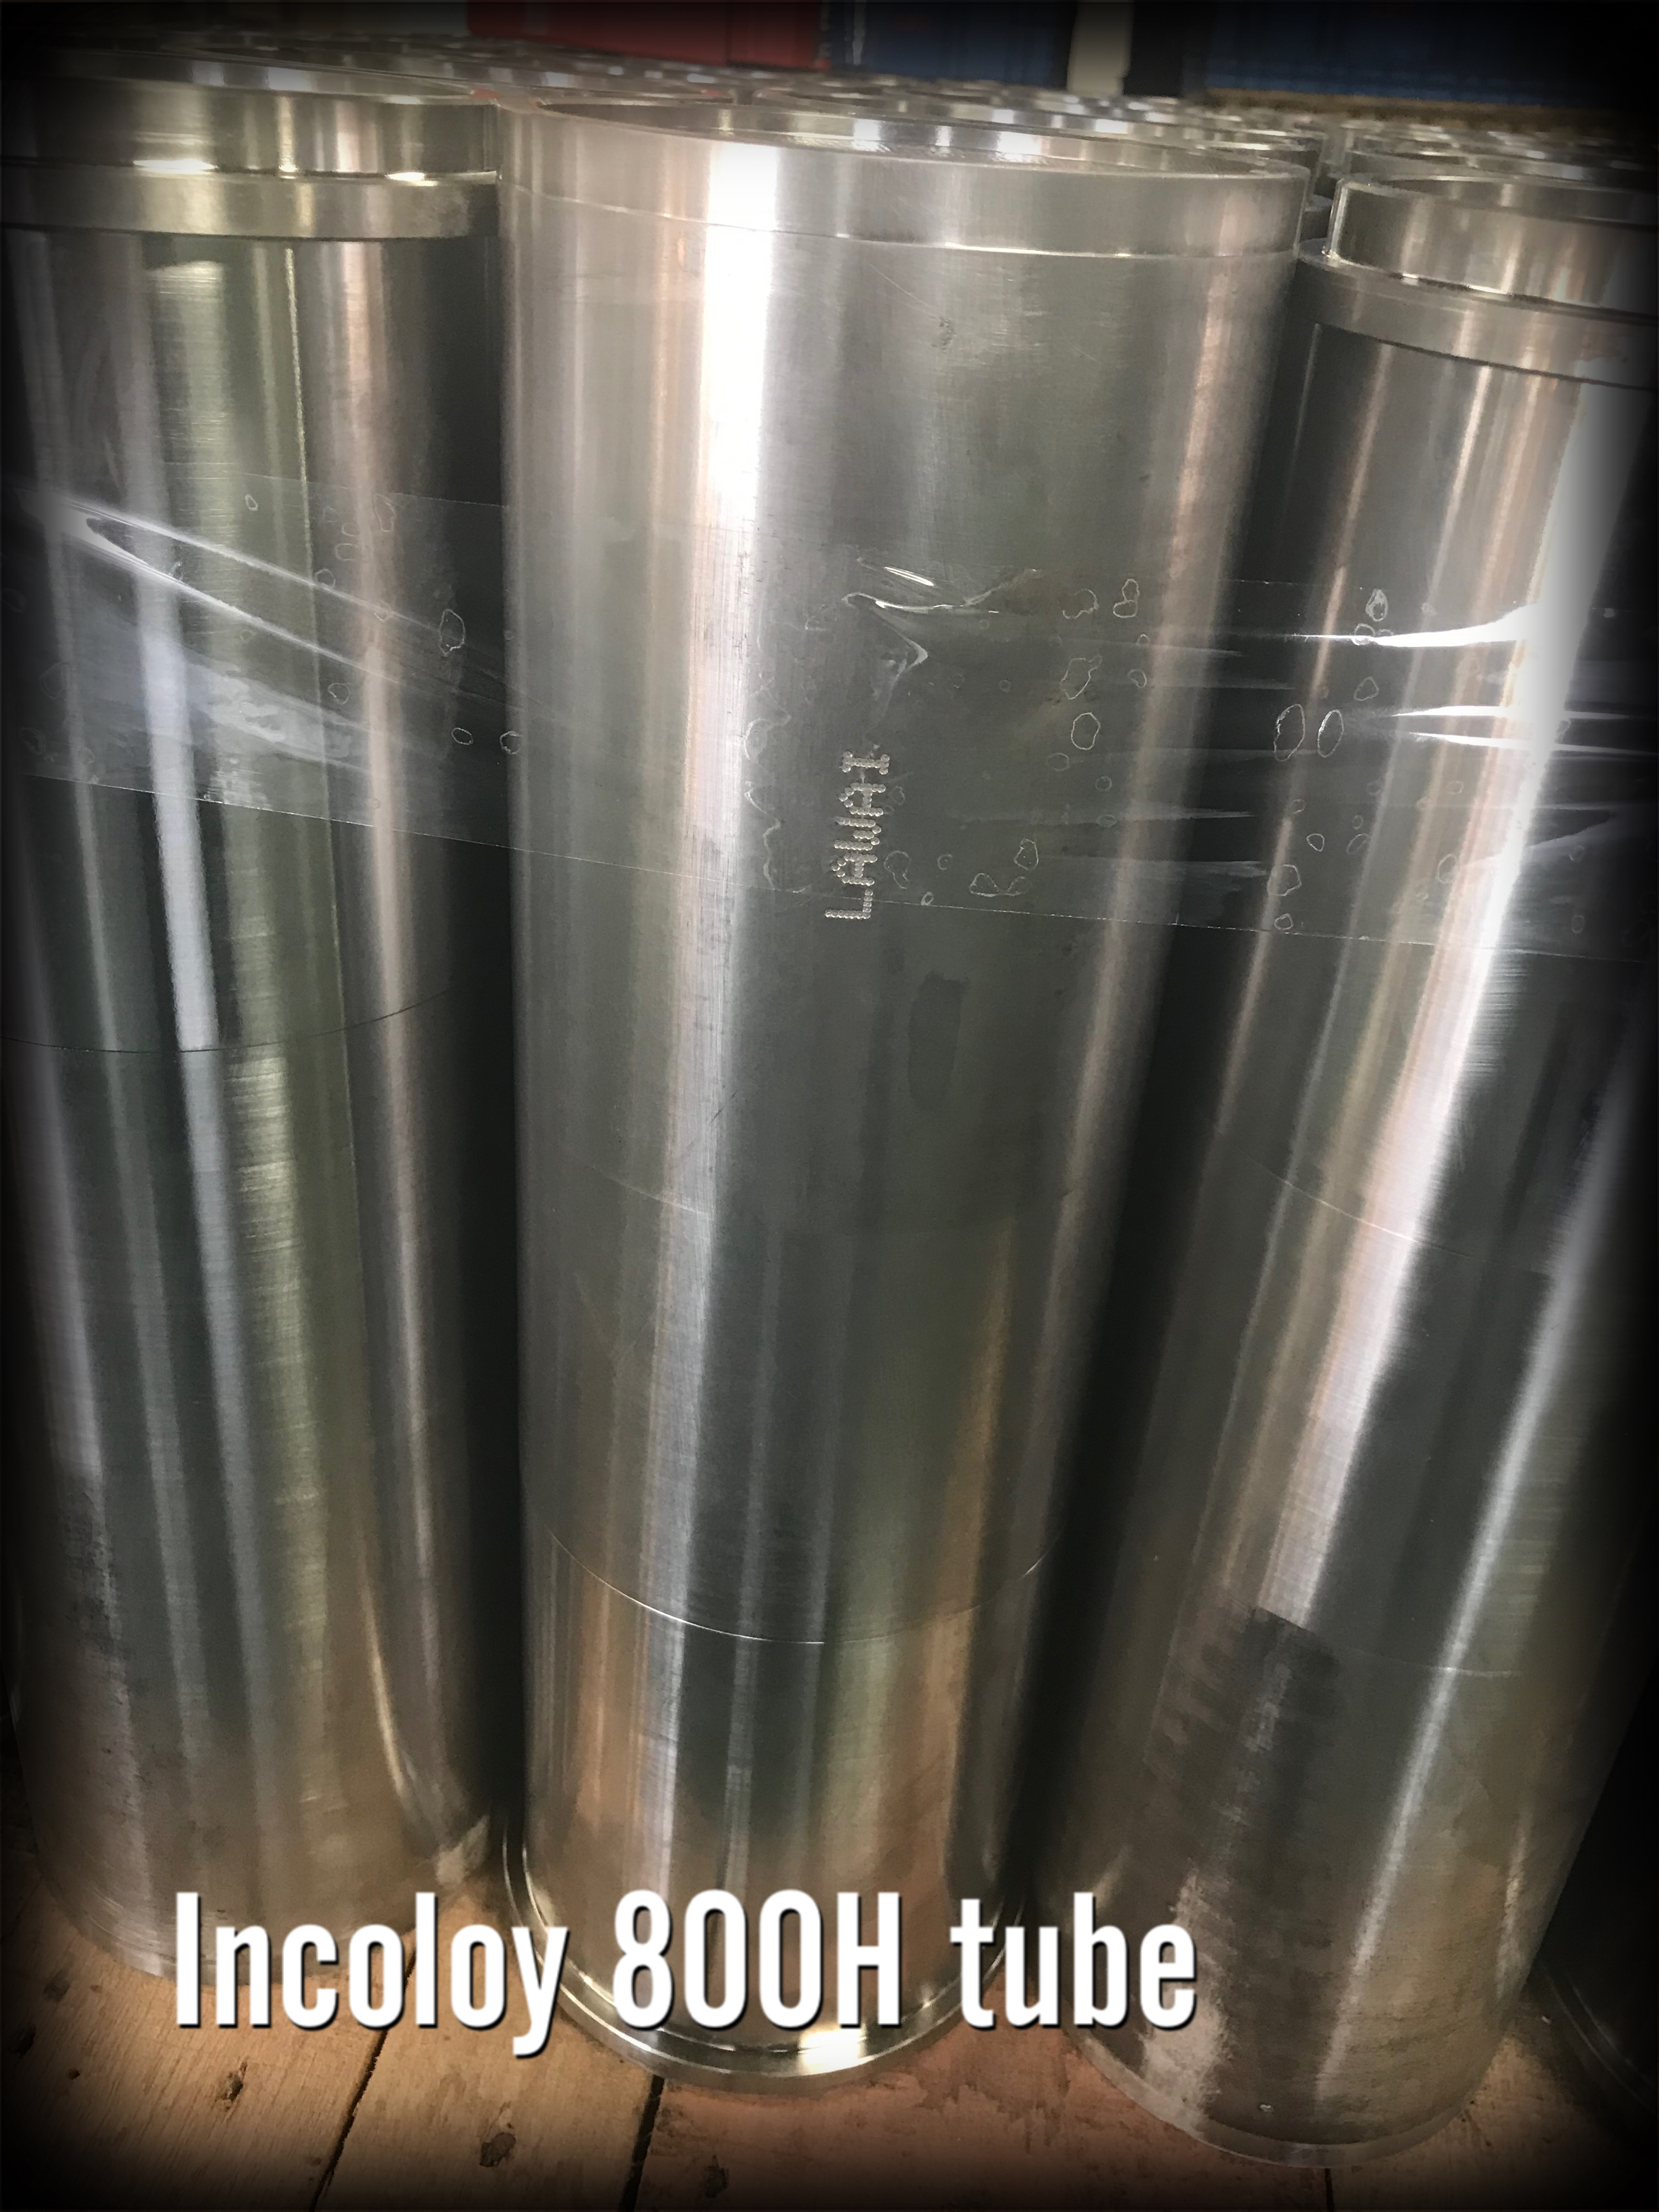 Incoloy 800H tube by centrifugal casting manufactured at LAWAI INDUSTRIAL CORP.